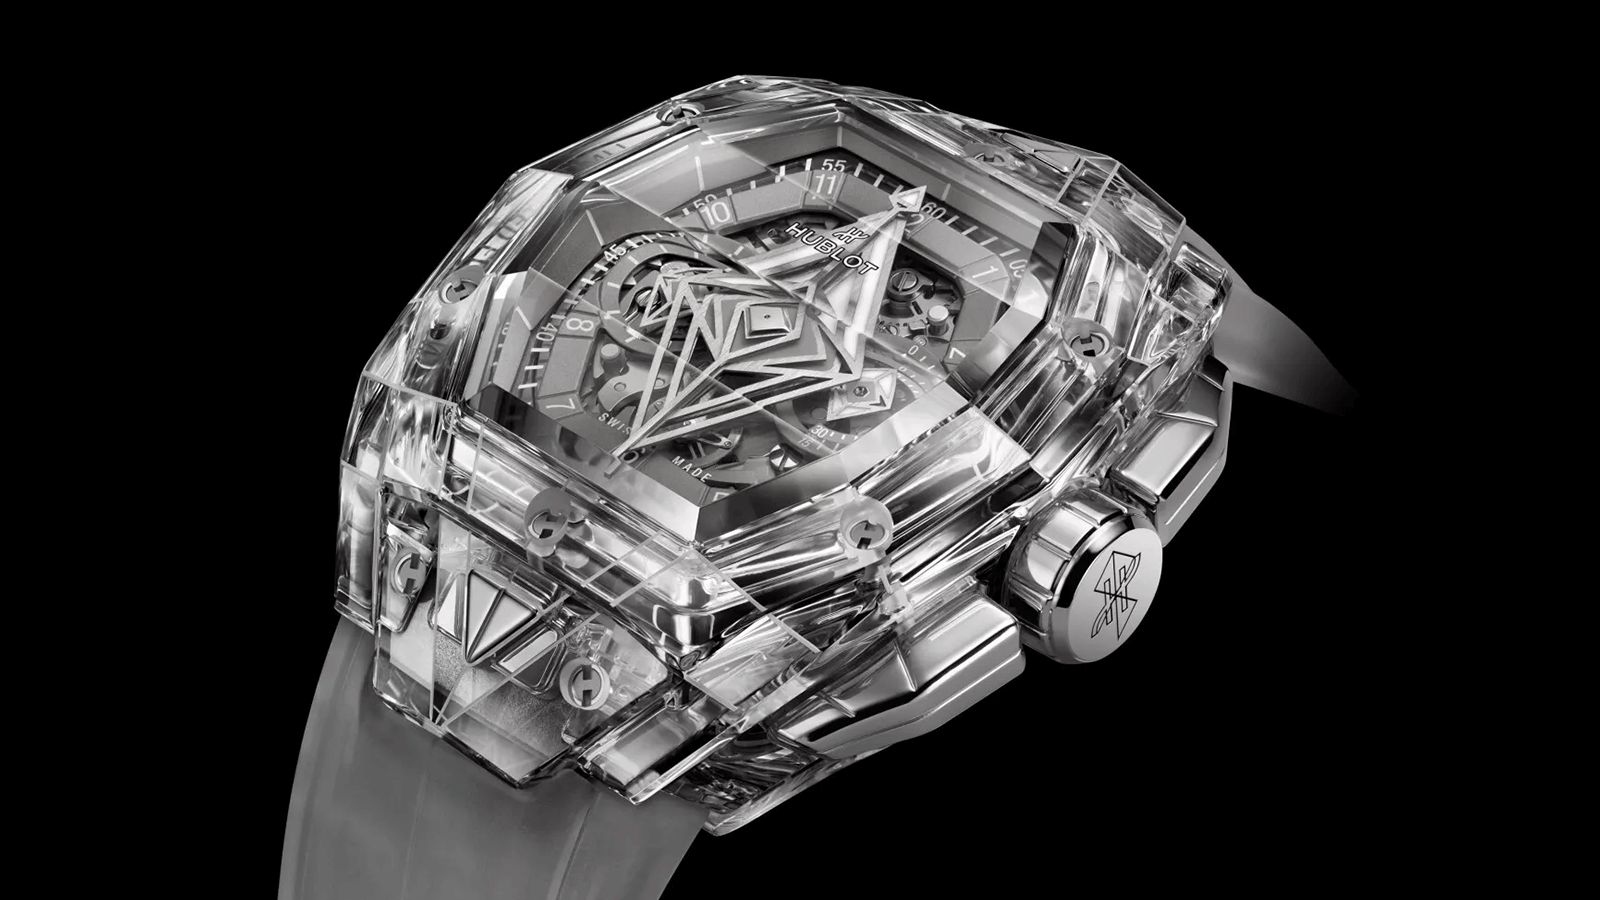 The sapphire now extends from the dial – which already revealed the HUB4700 self-winding skeleton chronograph movement through the disc hands designed by Sang Bleu – to the case and the bezel, enhancing the watch’s organic design.